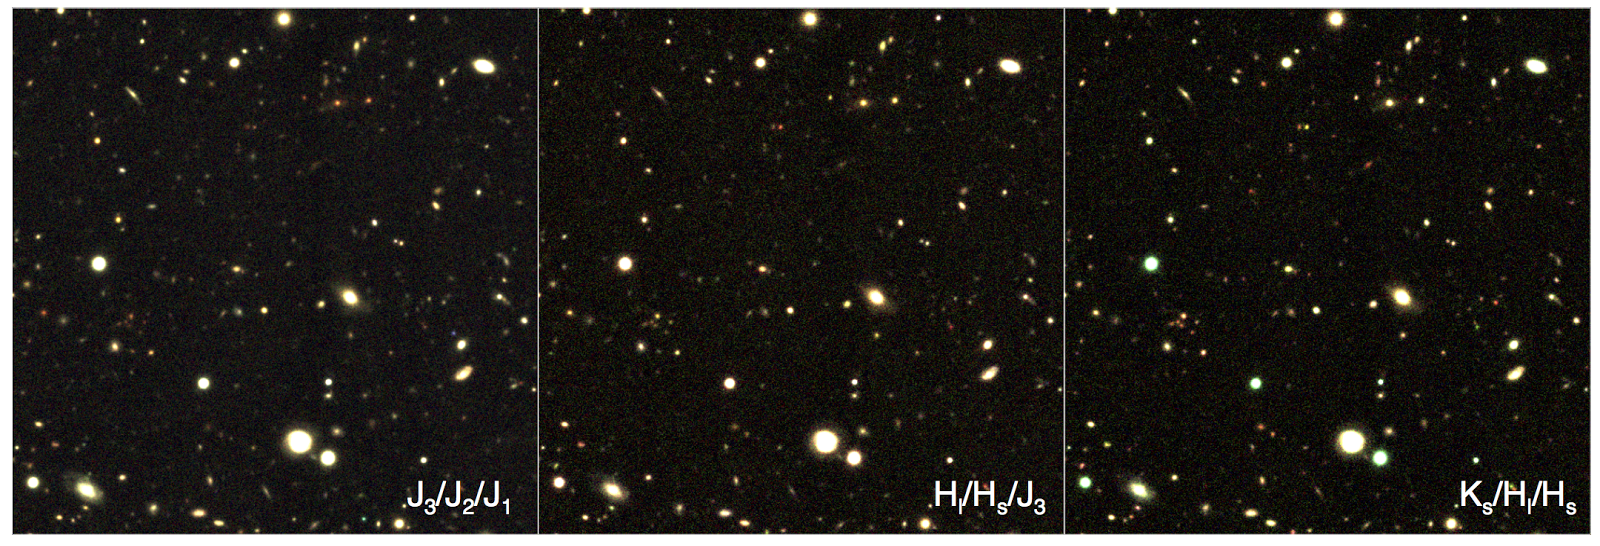 False color images of the same cutout region as shown in Figure 4, demonstrating the high quality obtained with the FourStar filters, as well as the usefulness of using medium-bandwidth filters to characterize the colors of galaxies within a classical J or H broadband. The filter combinations that were used in each panel are indicated at the bottom (red/green/blue).